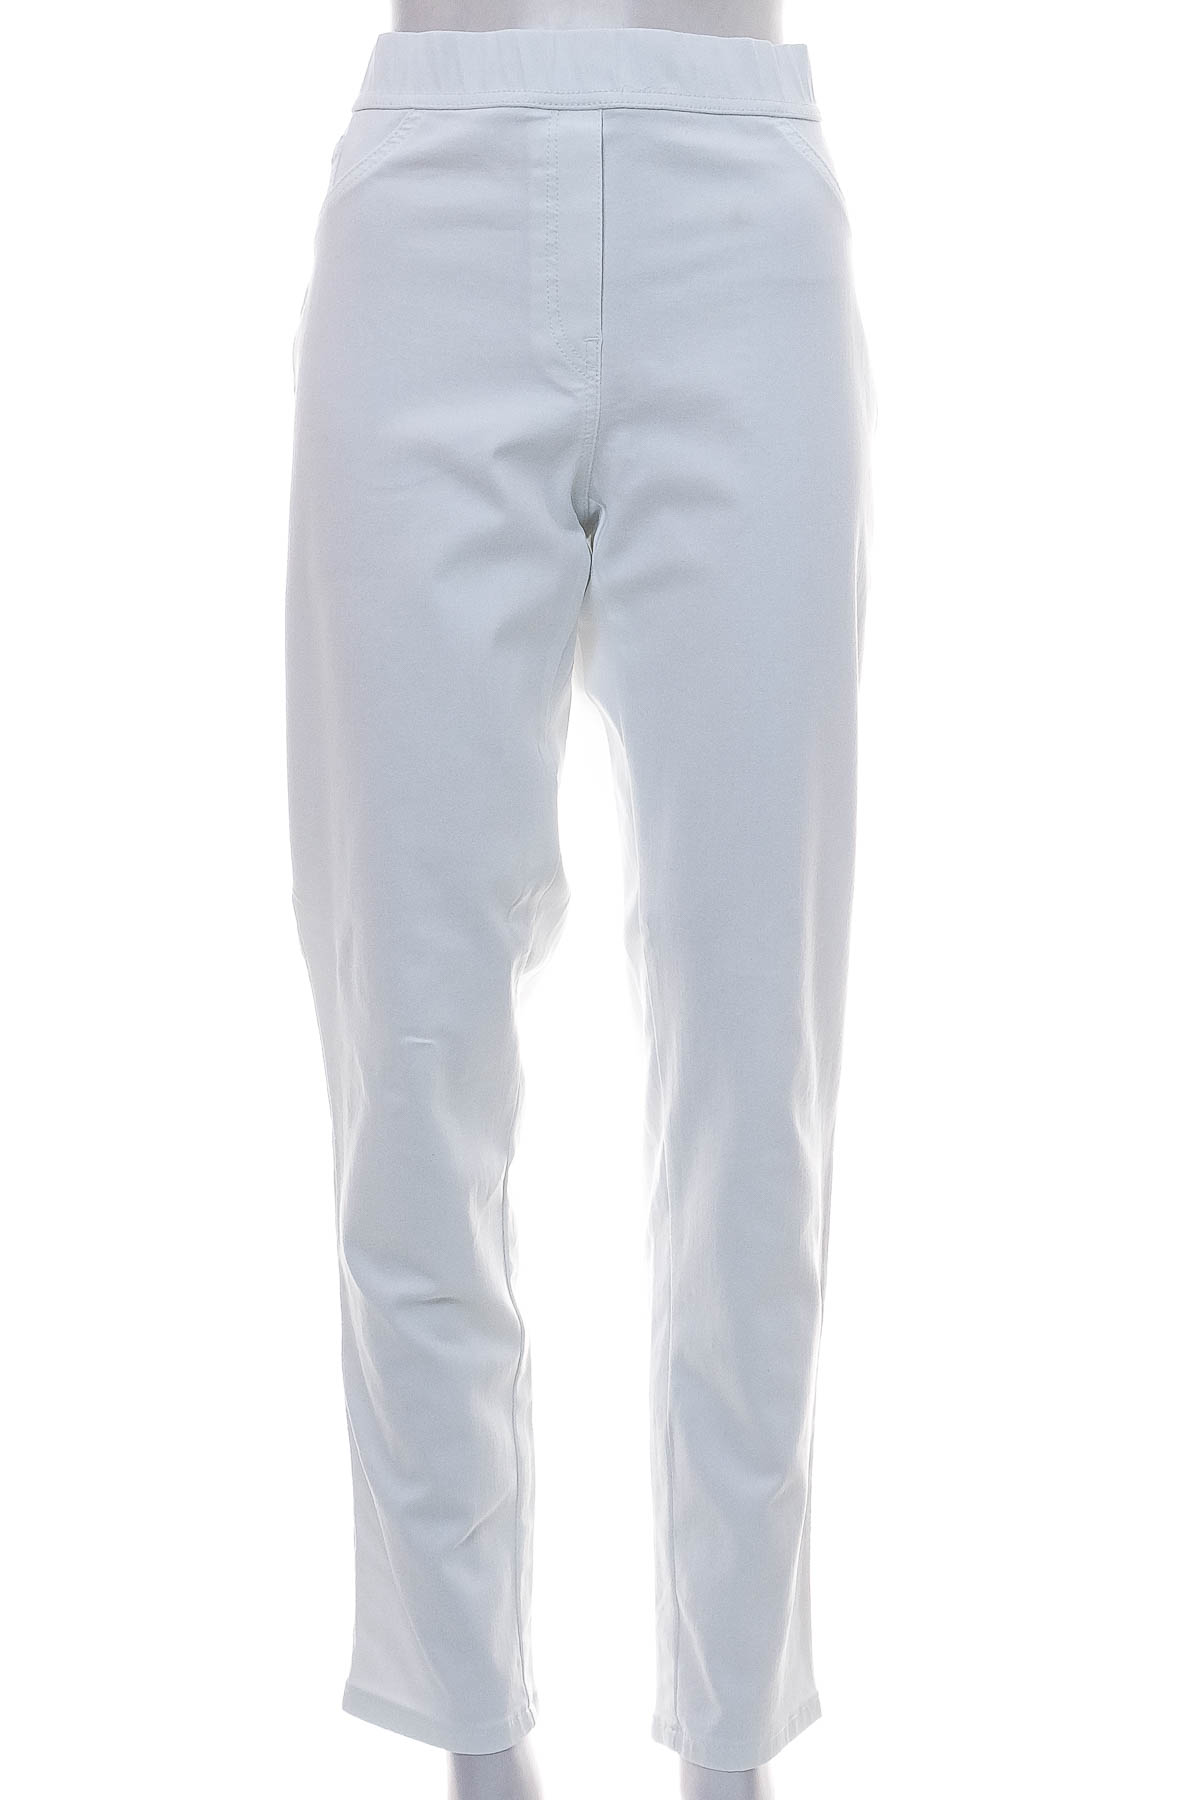 Women's trousers - THOM BY THOMAS RATH - 0